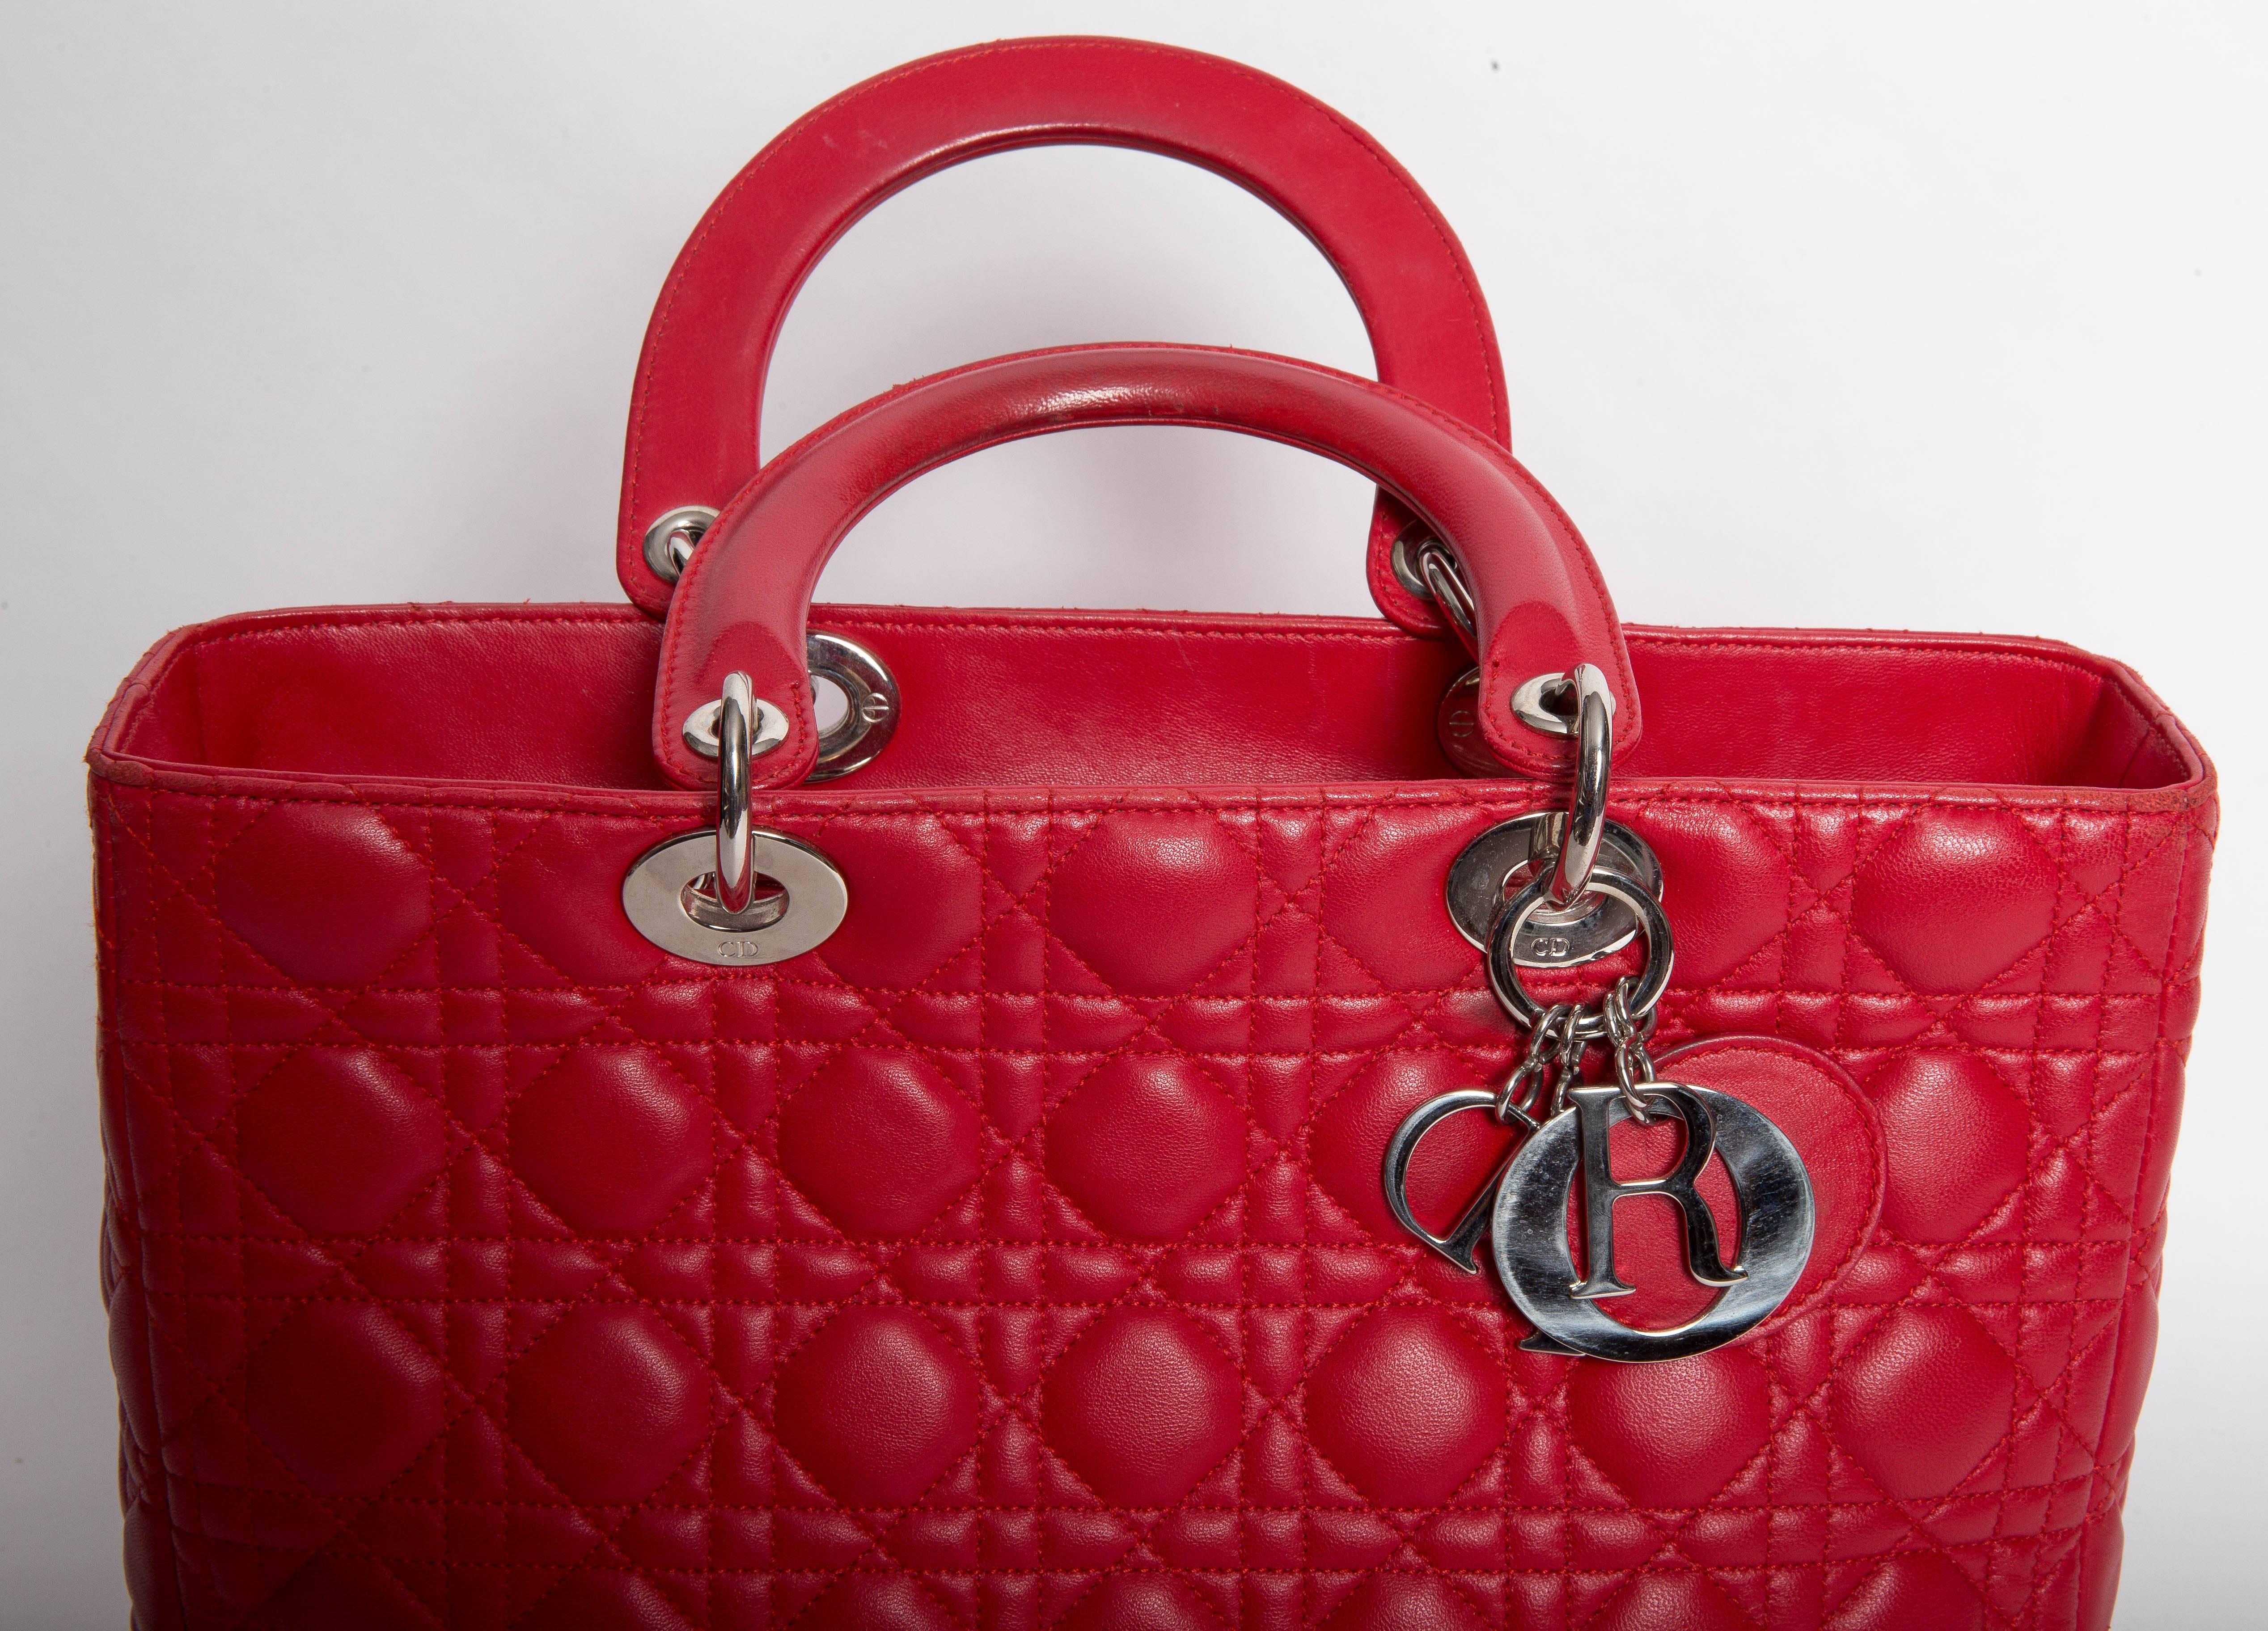 Women's Christian Dior Lady Dior Red Leather Bag with Silver Hardware